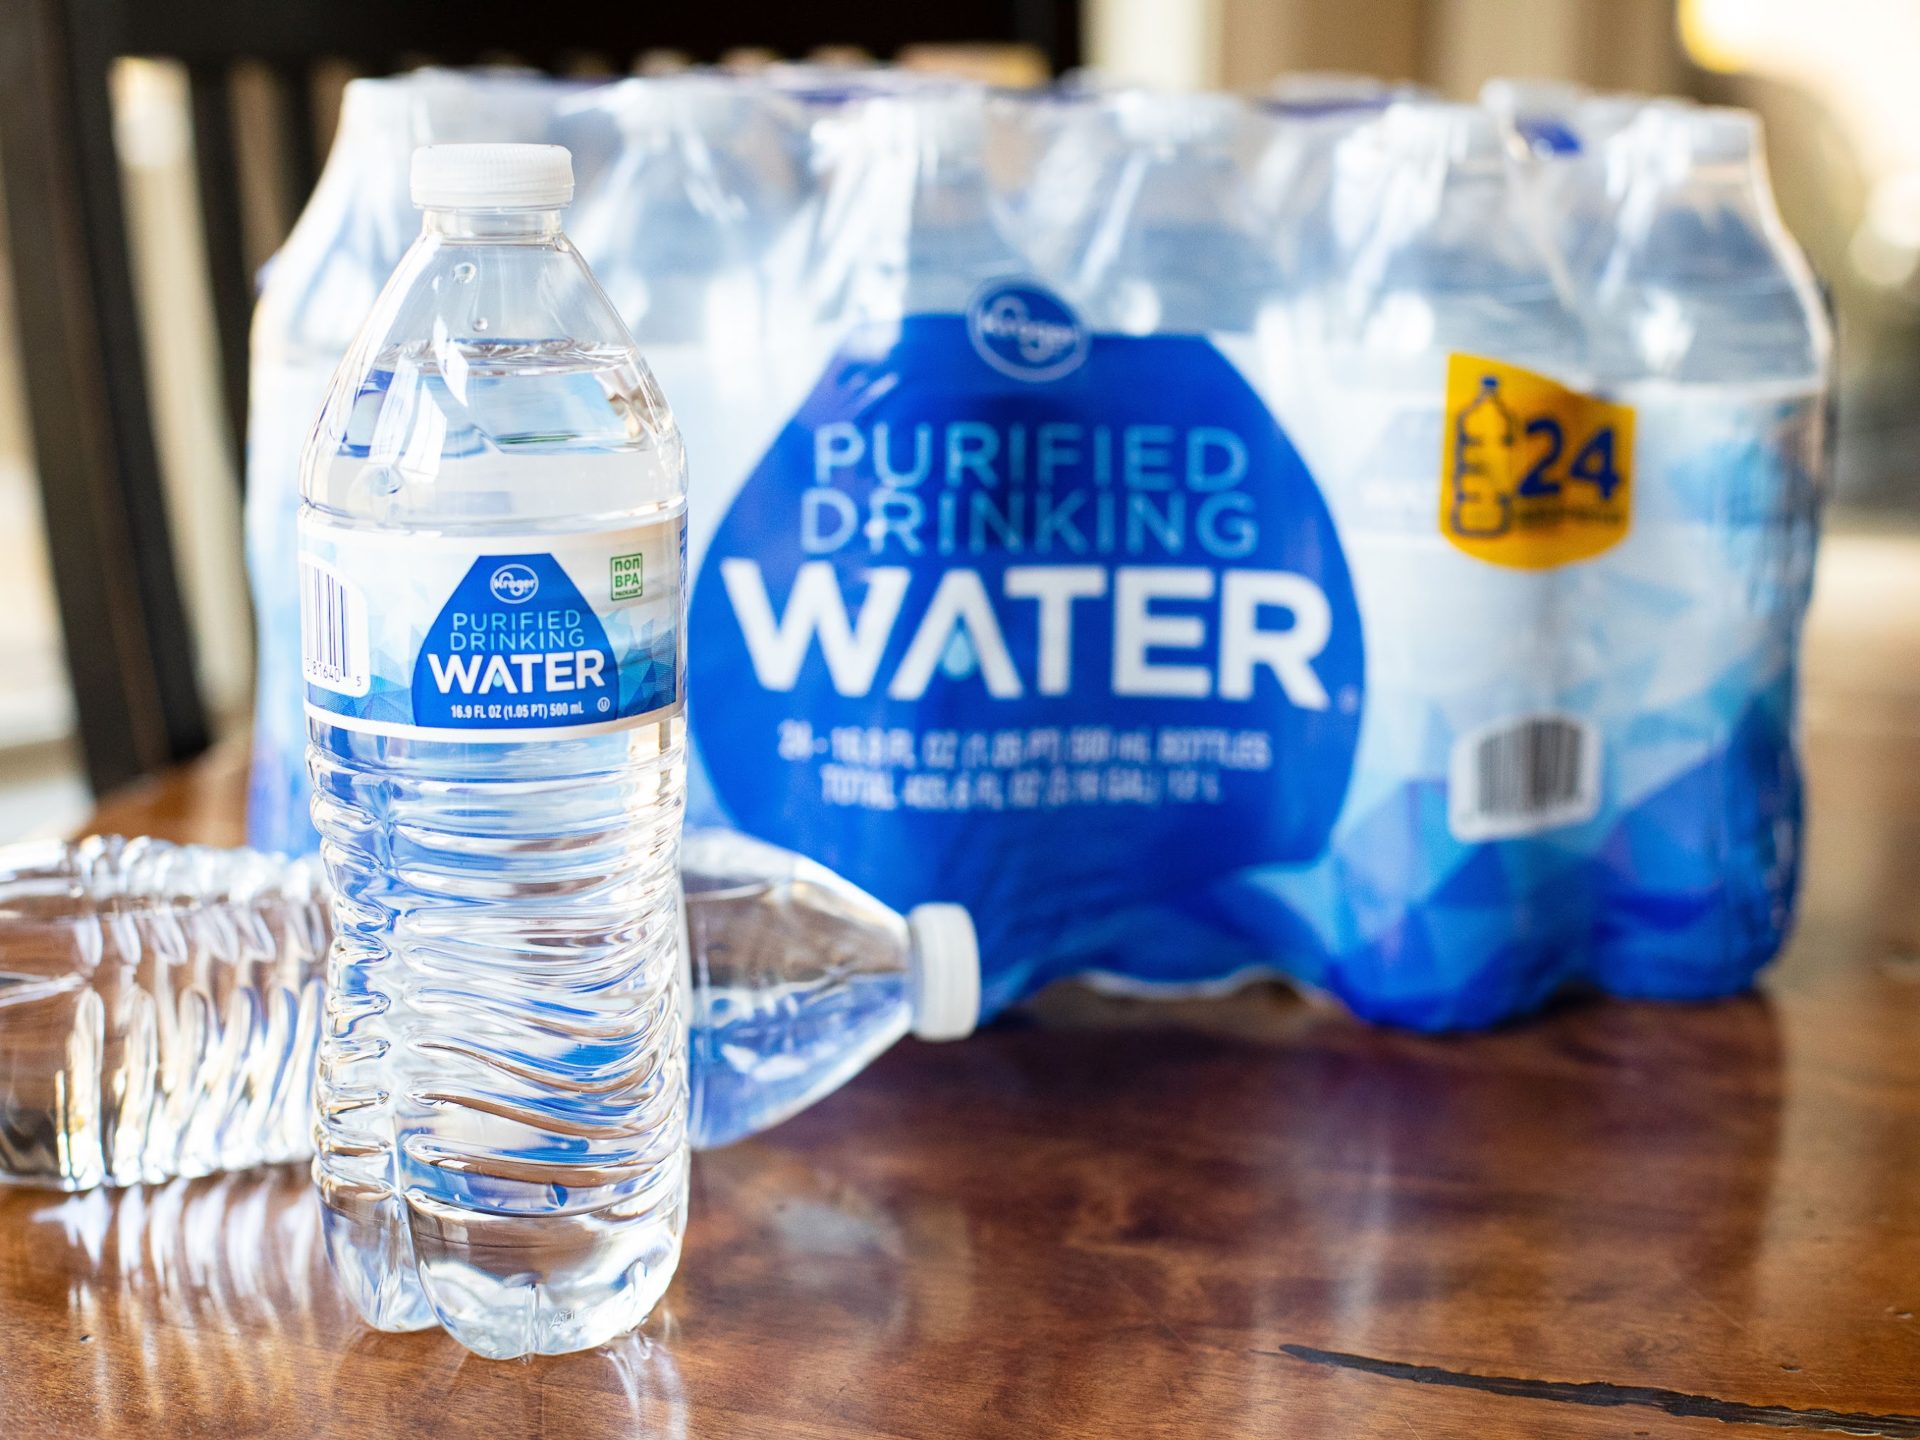 Kroger Purified Drinking Water Just $2.49 At Kroger